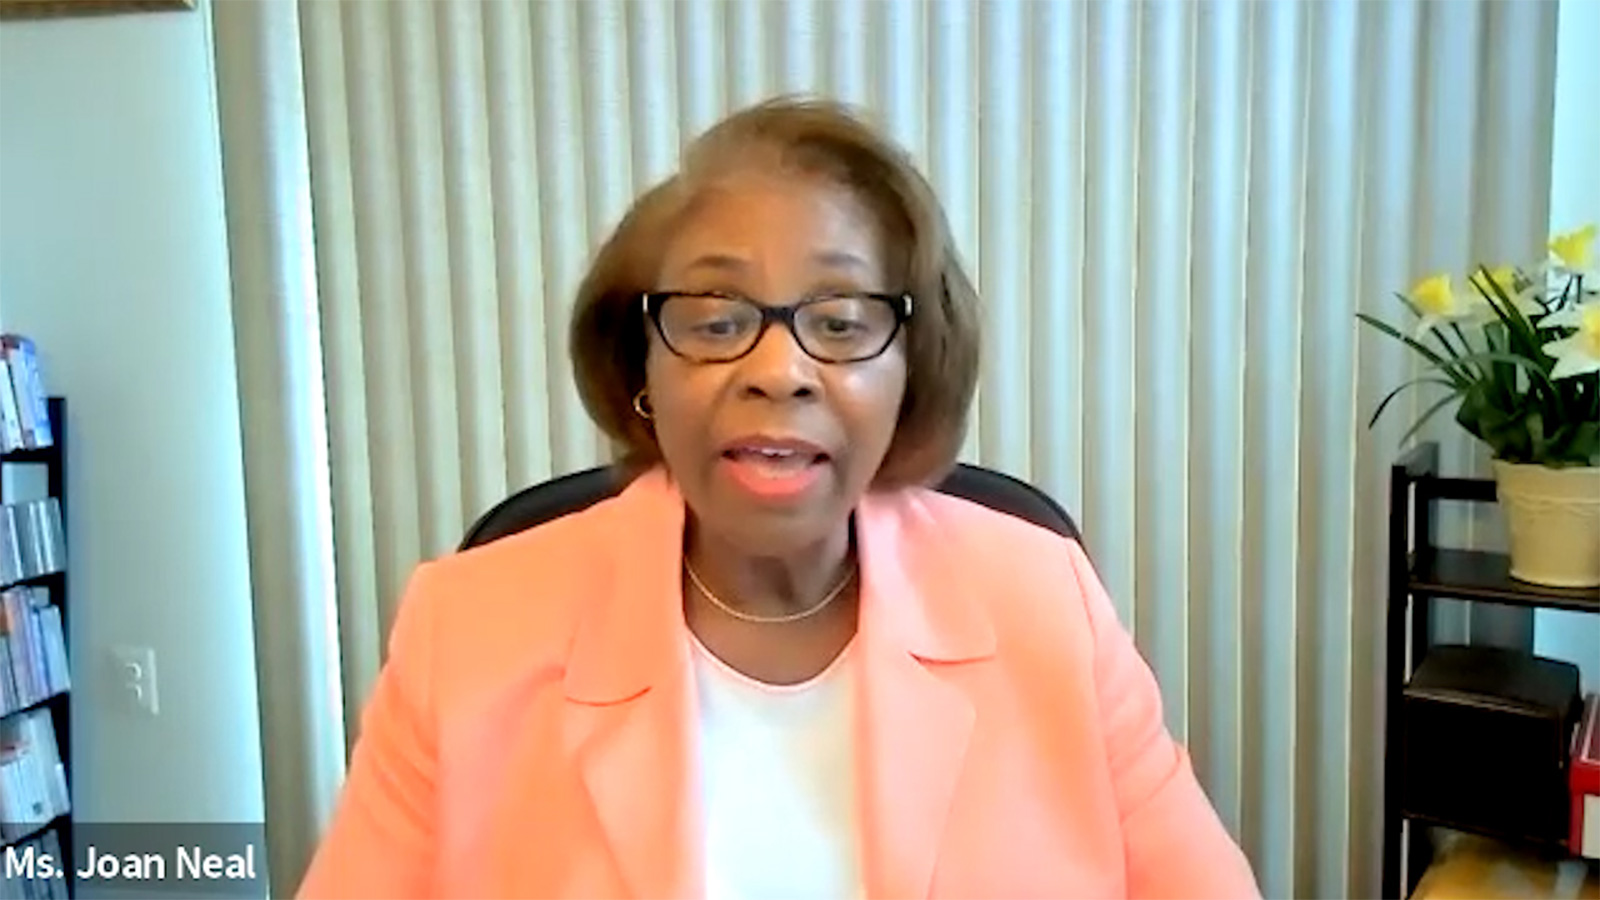 July 21, 2022 HR-40 Virtual Press Conference - Ms. Joan Neal, Deputy Executive Director, Network Lobby 